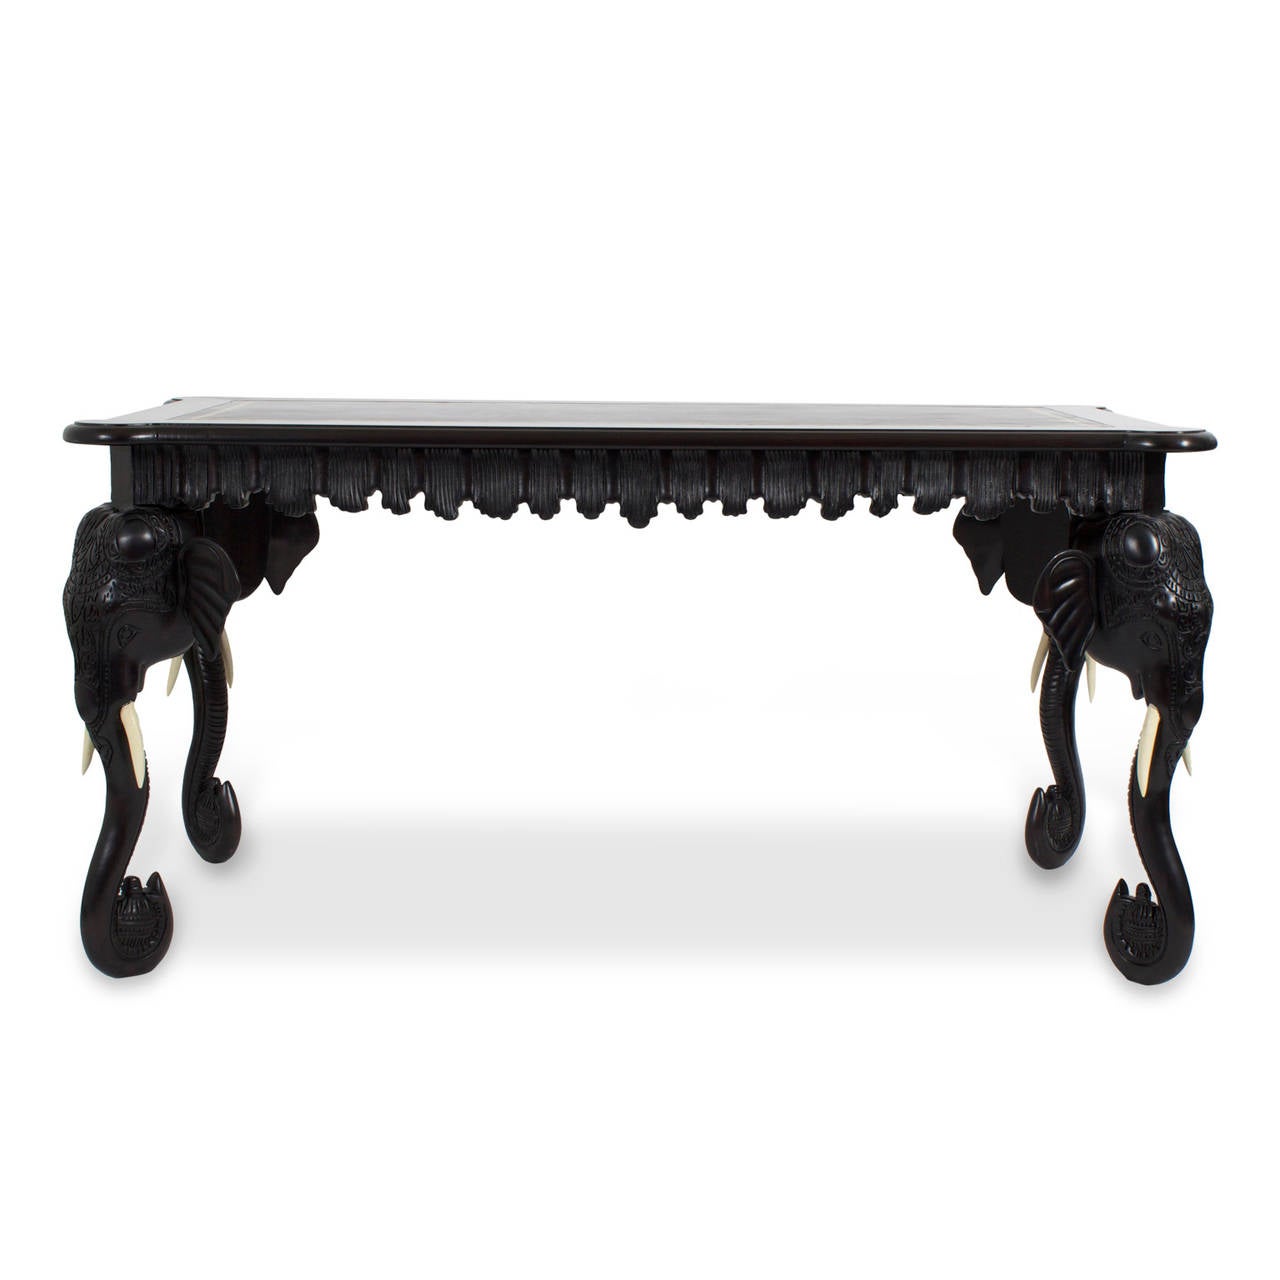 Exotic, vintage one drawer leather top writing table or desk featuring four carved wood elephant heads and trunks as legs, a carved and scalloped undulating pleated skirt, all in an ebonized finish with a tooled brown leather top. A tremendously